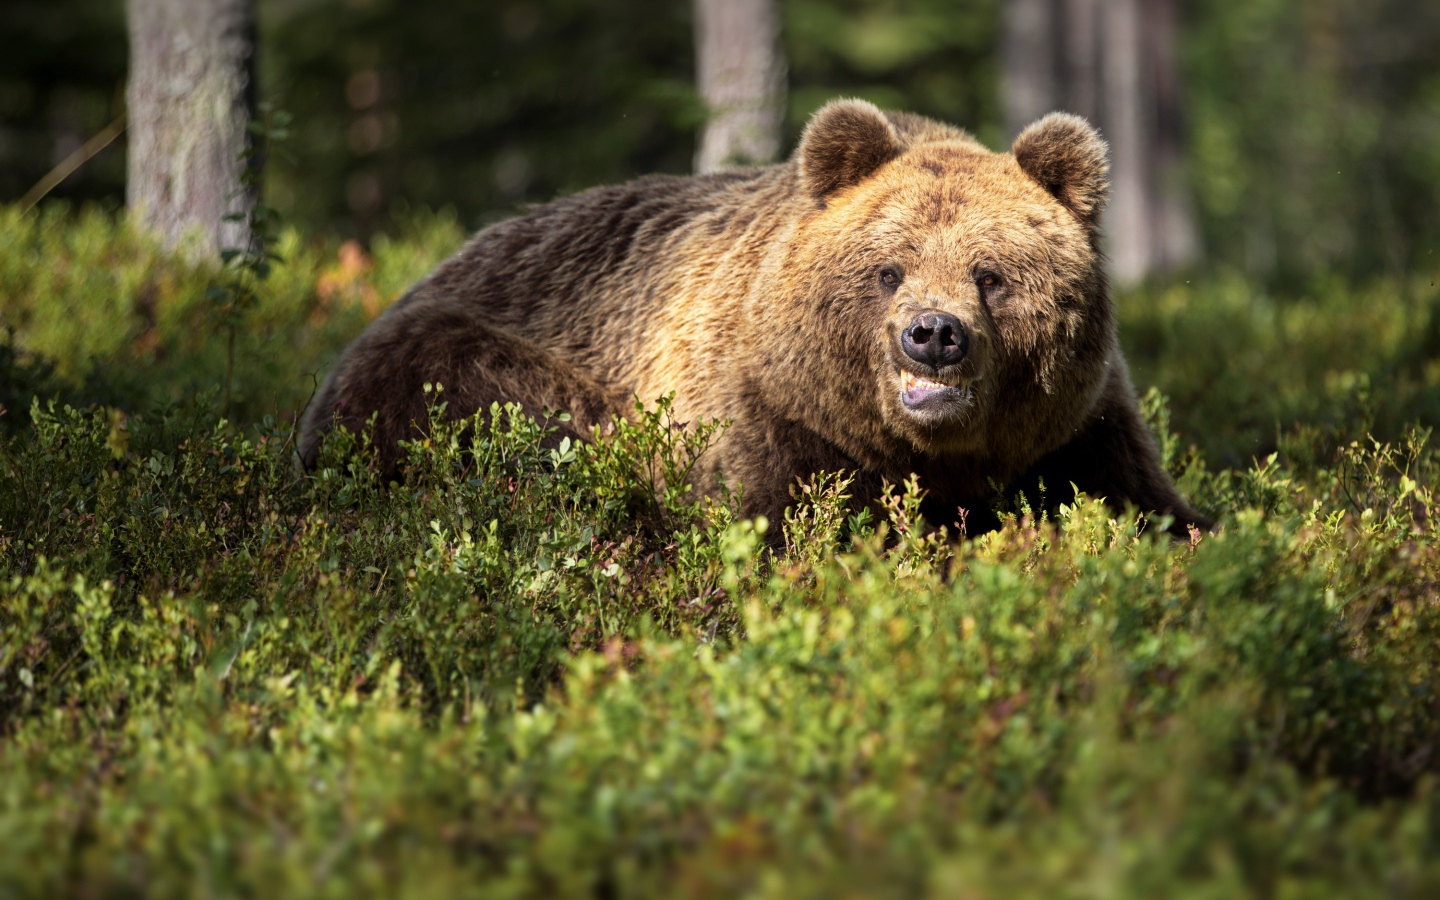 Terrible brown bear in the thicket in the forest